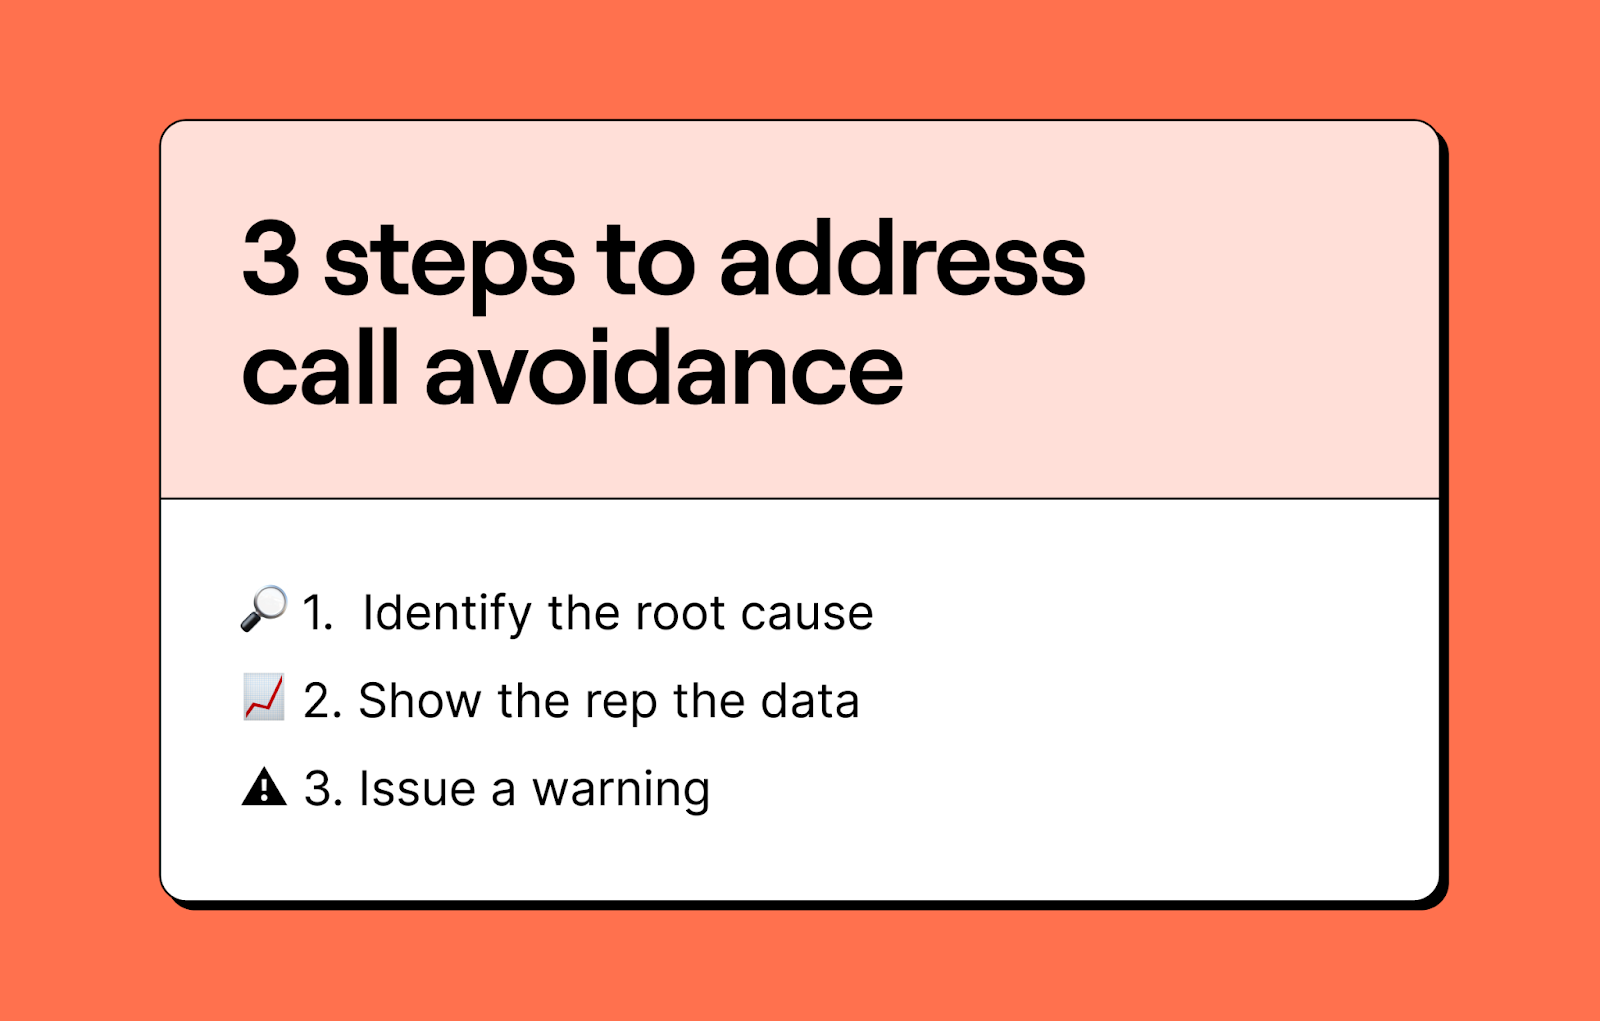 steps to address call avoidance: Identify the root cause, show the rep data, and issue warning